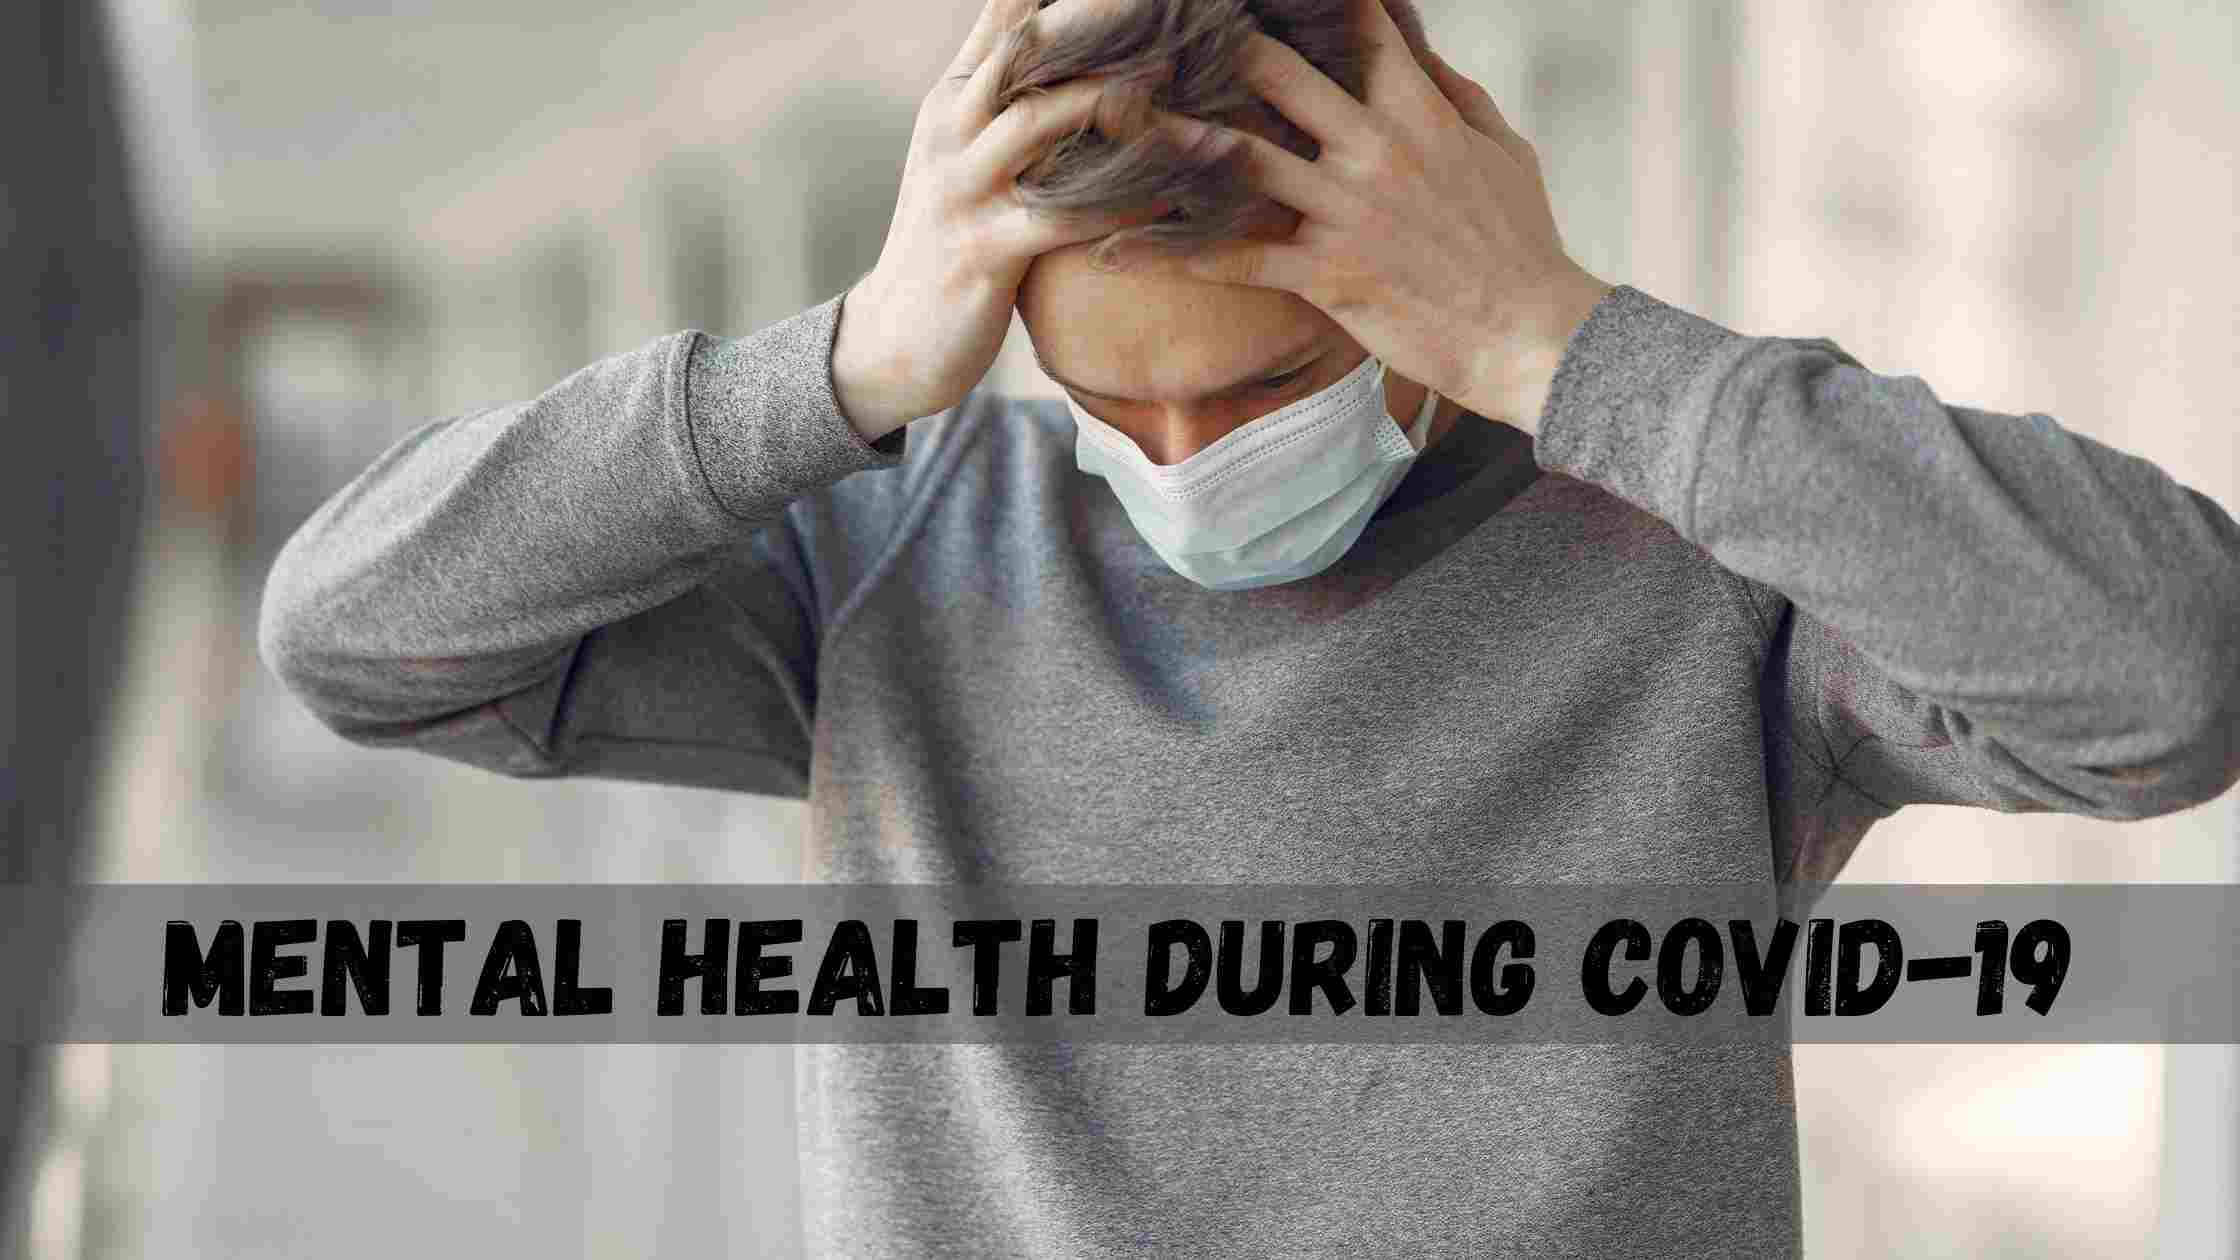 Coping Up Your Mental Health During COVID-19